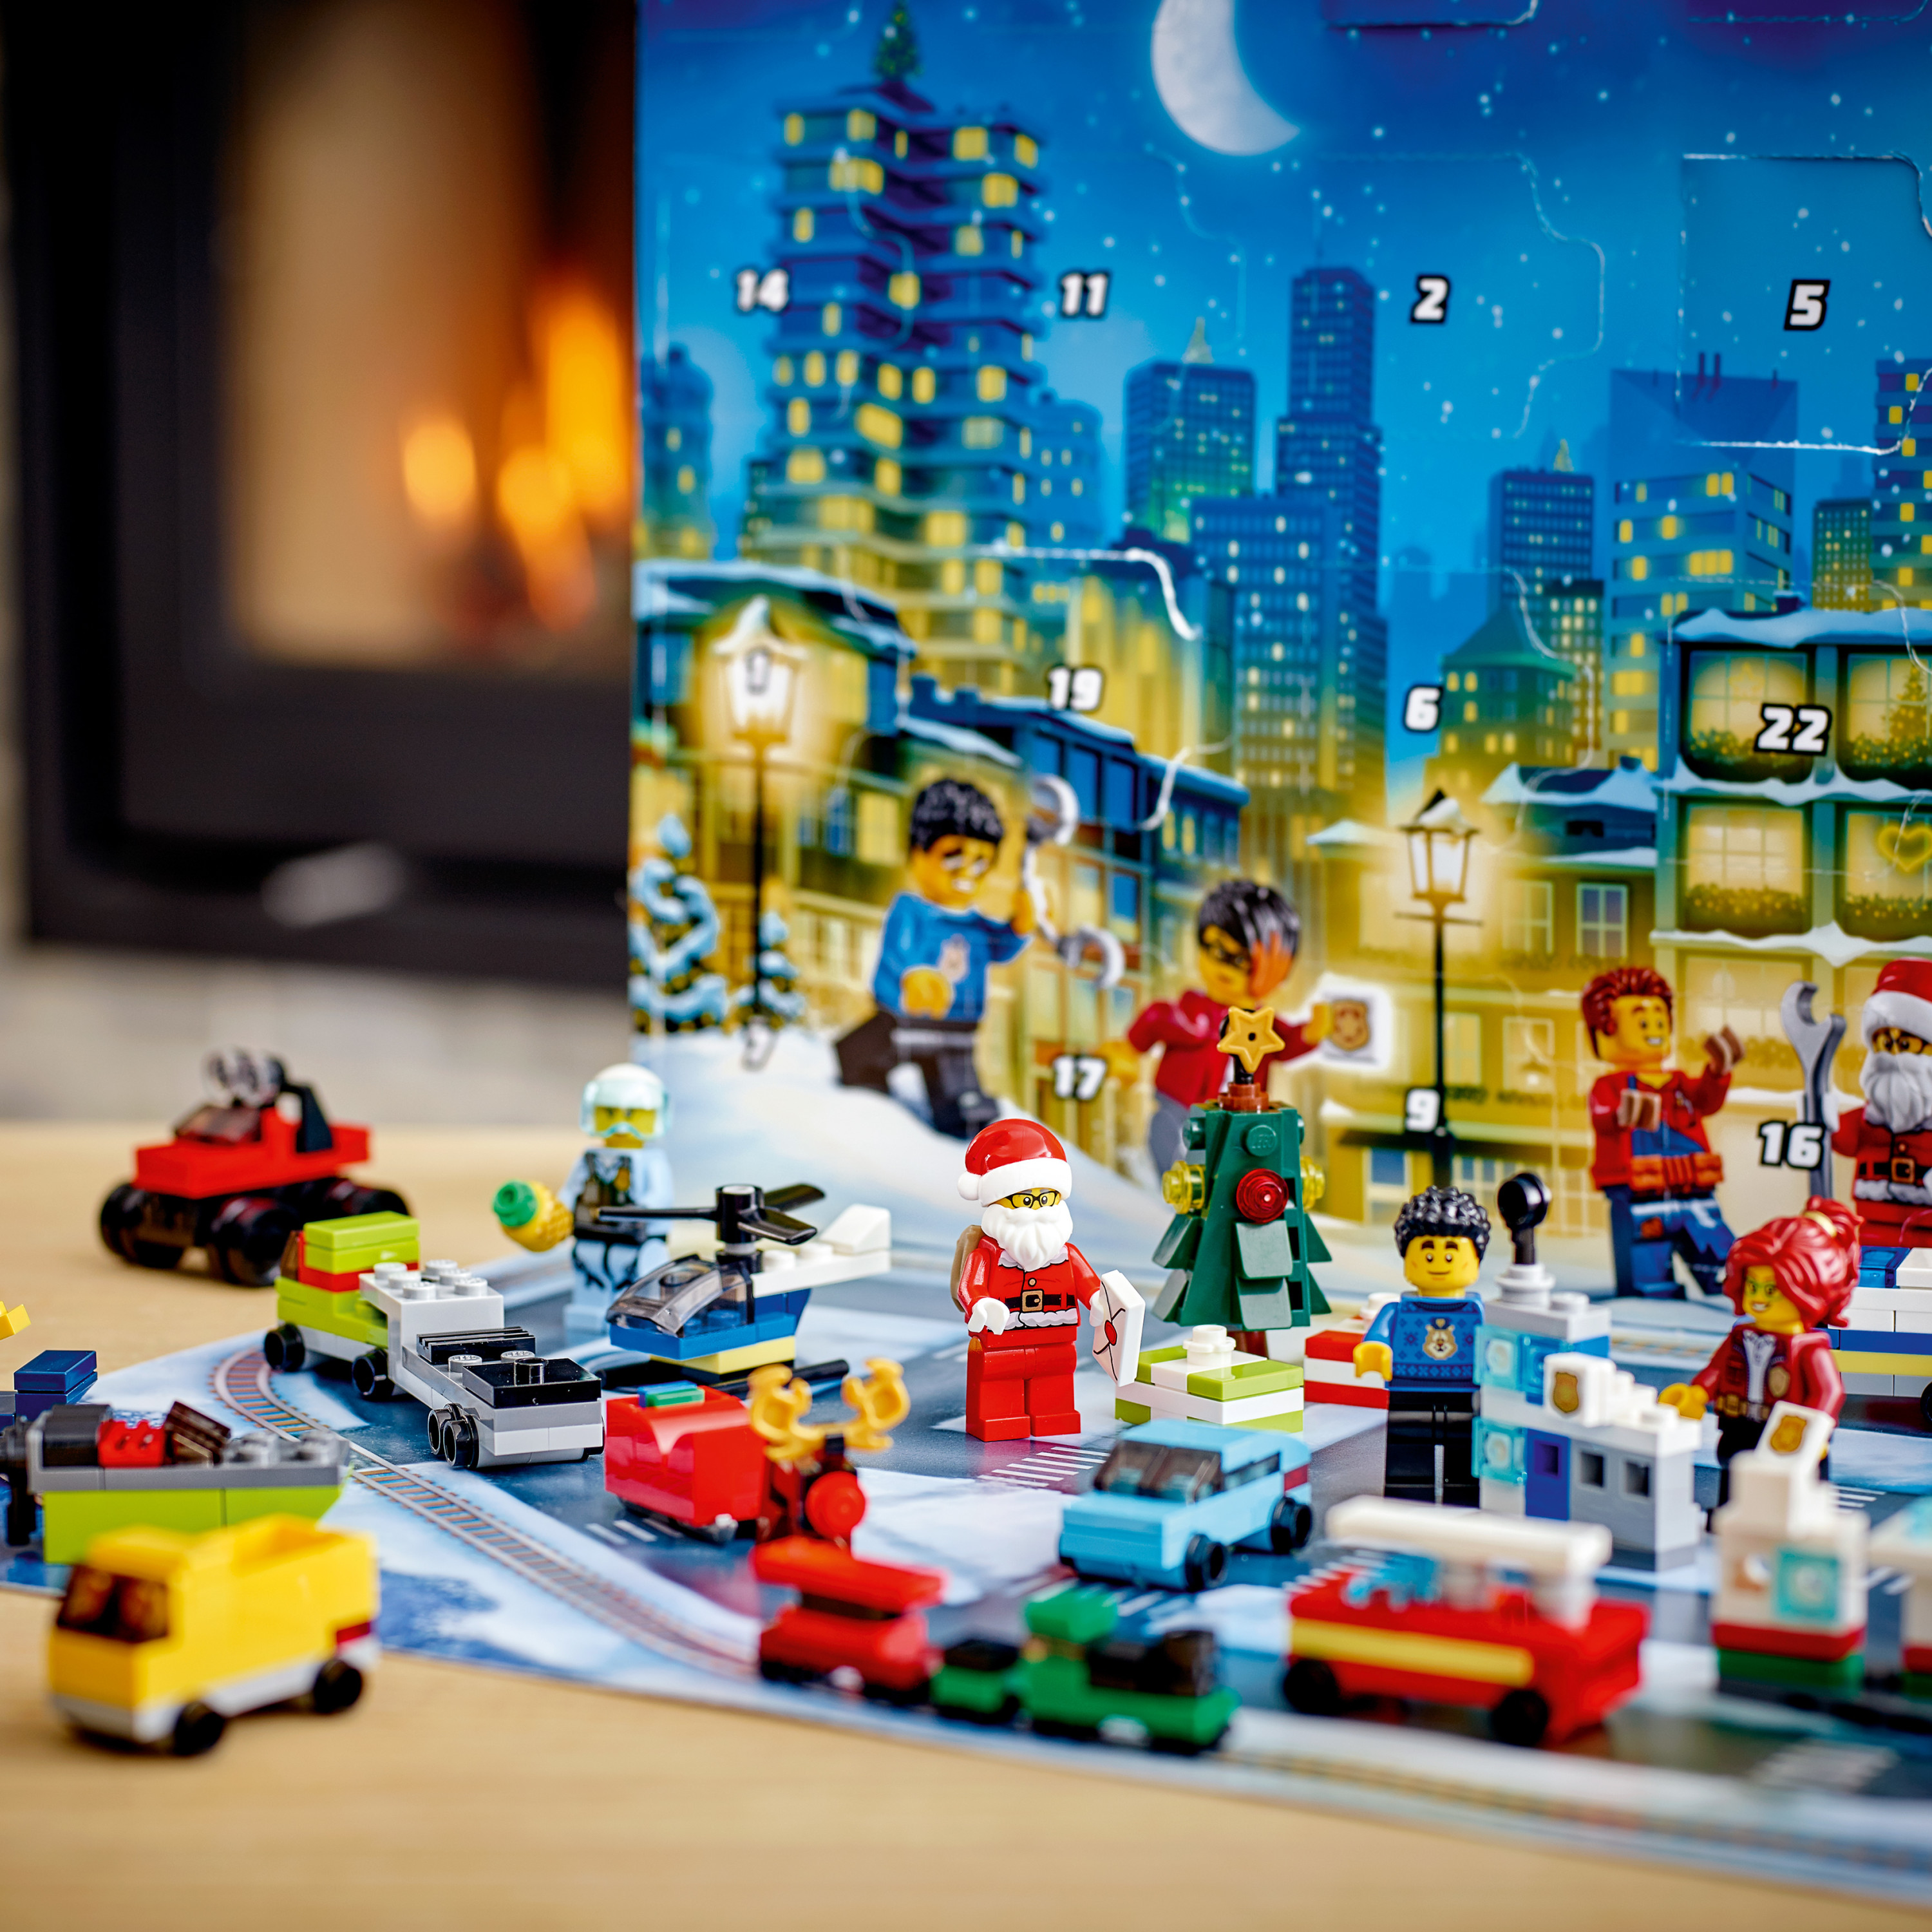 LEGO City Advent Calendar 60268, With City Play Mat, Best Festive Toys for Kids (342 Pieces) - image 3 of 7